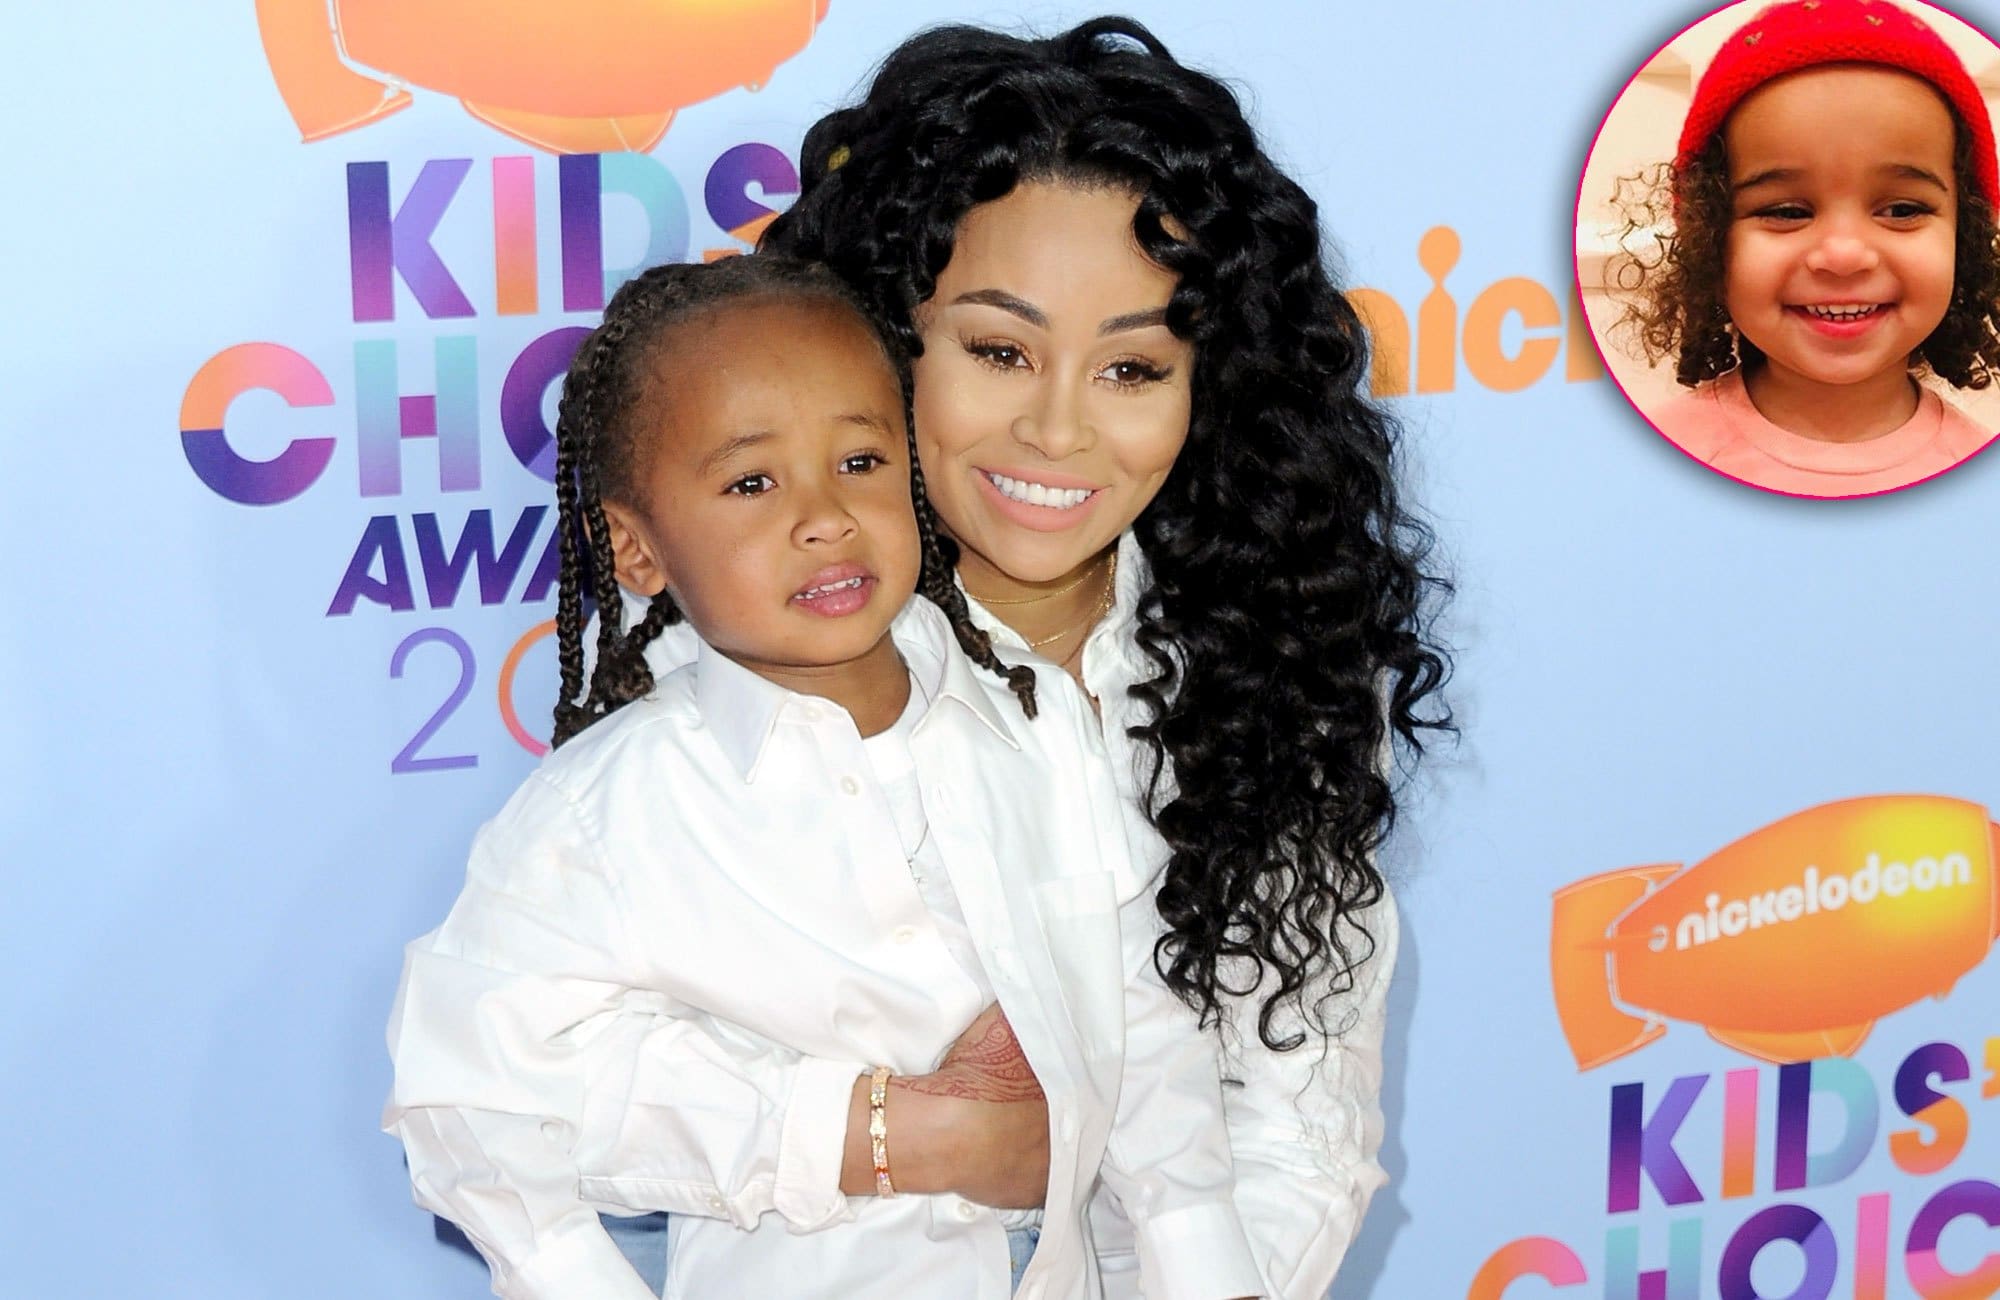 Blac Chyna Is Twining With Her Daughter, Dream Kardashian - Check Out Their Photo Together